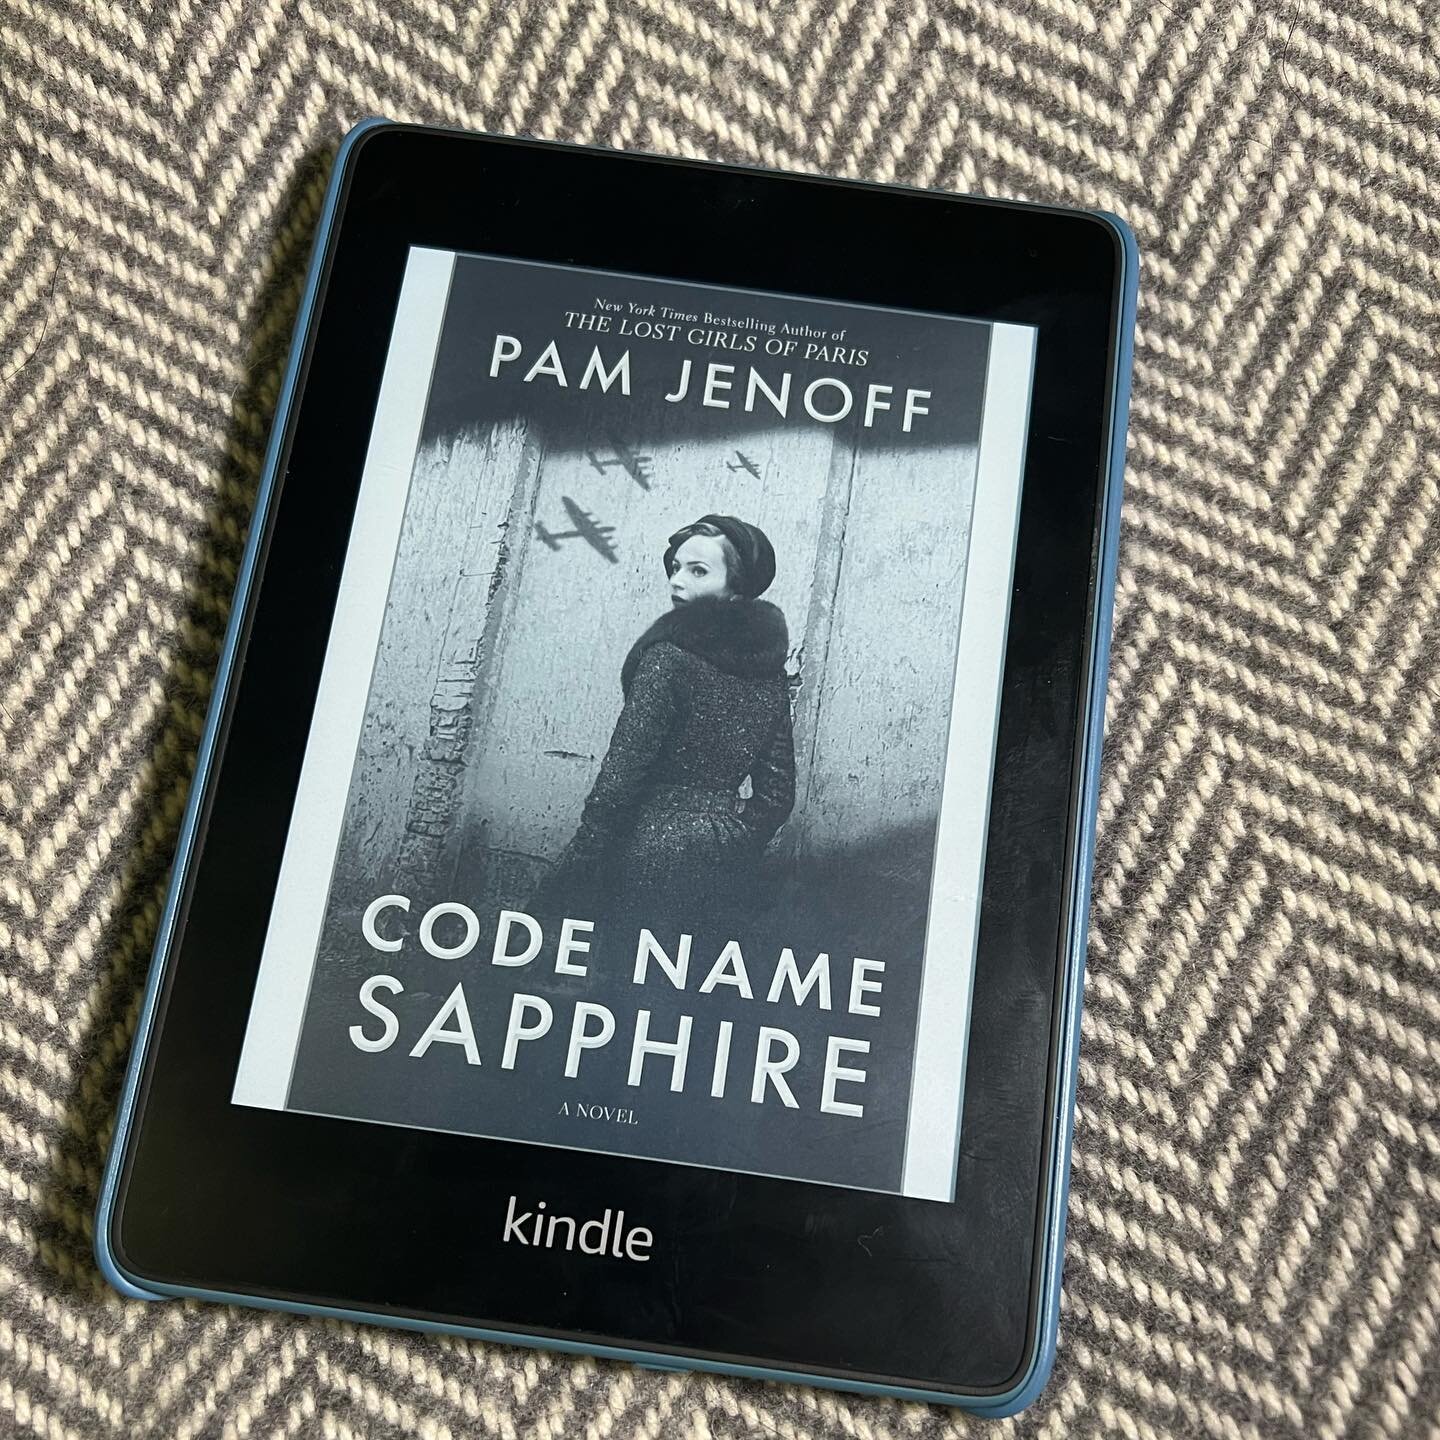 Code Name Sapphire by @pamjenoff, released today by @parkrowbooks. 

HerKentucky Whiskey Glass Rating: 
🥃🥃🥃🥃(of 5)

Pam Jenoff &mdash; an author, law professor and former diplomat &mdash; consistently delivers smart, complex and compelling storie